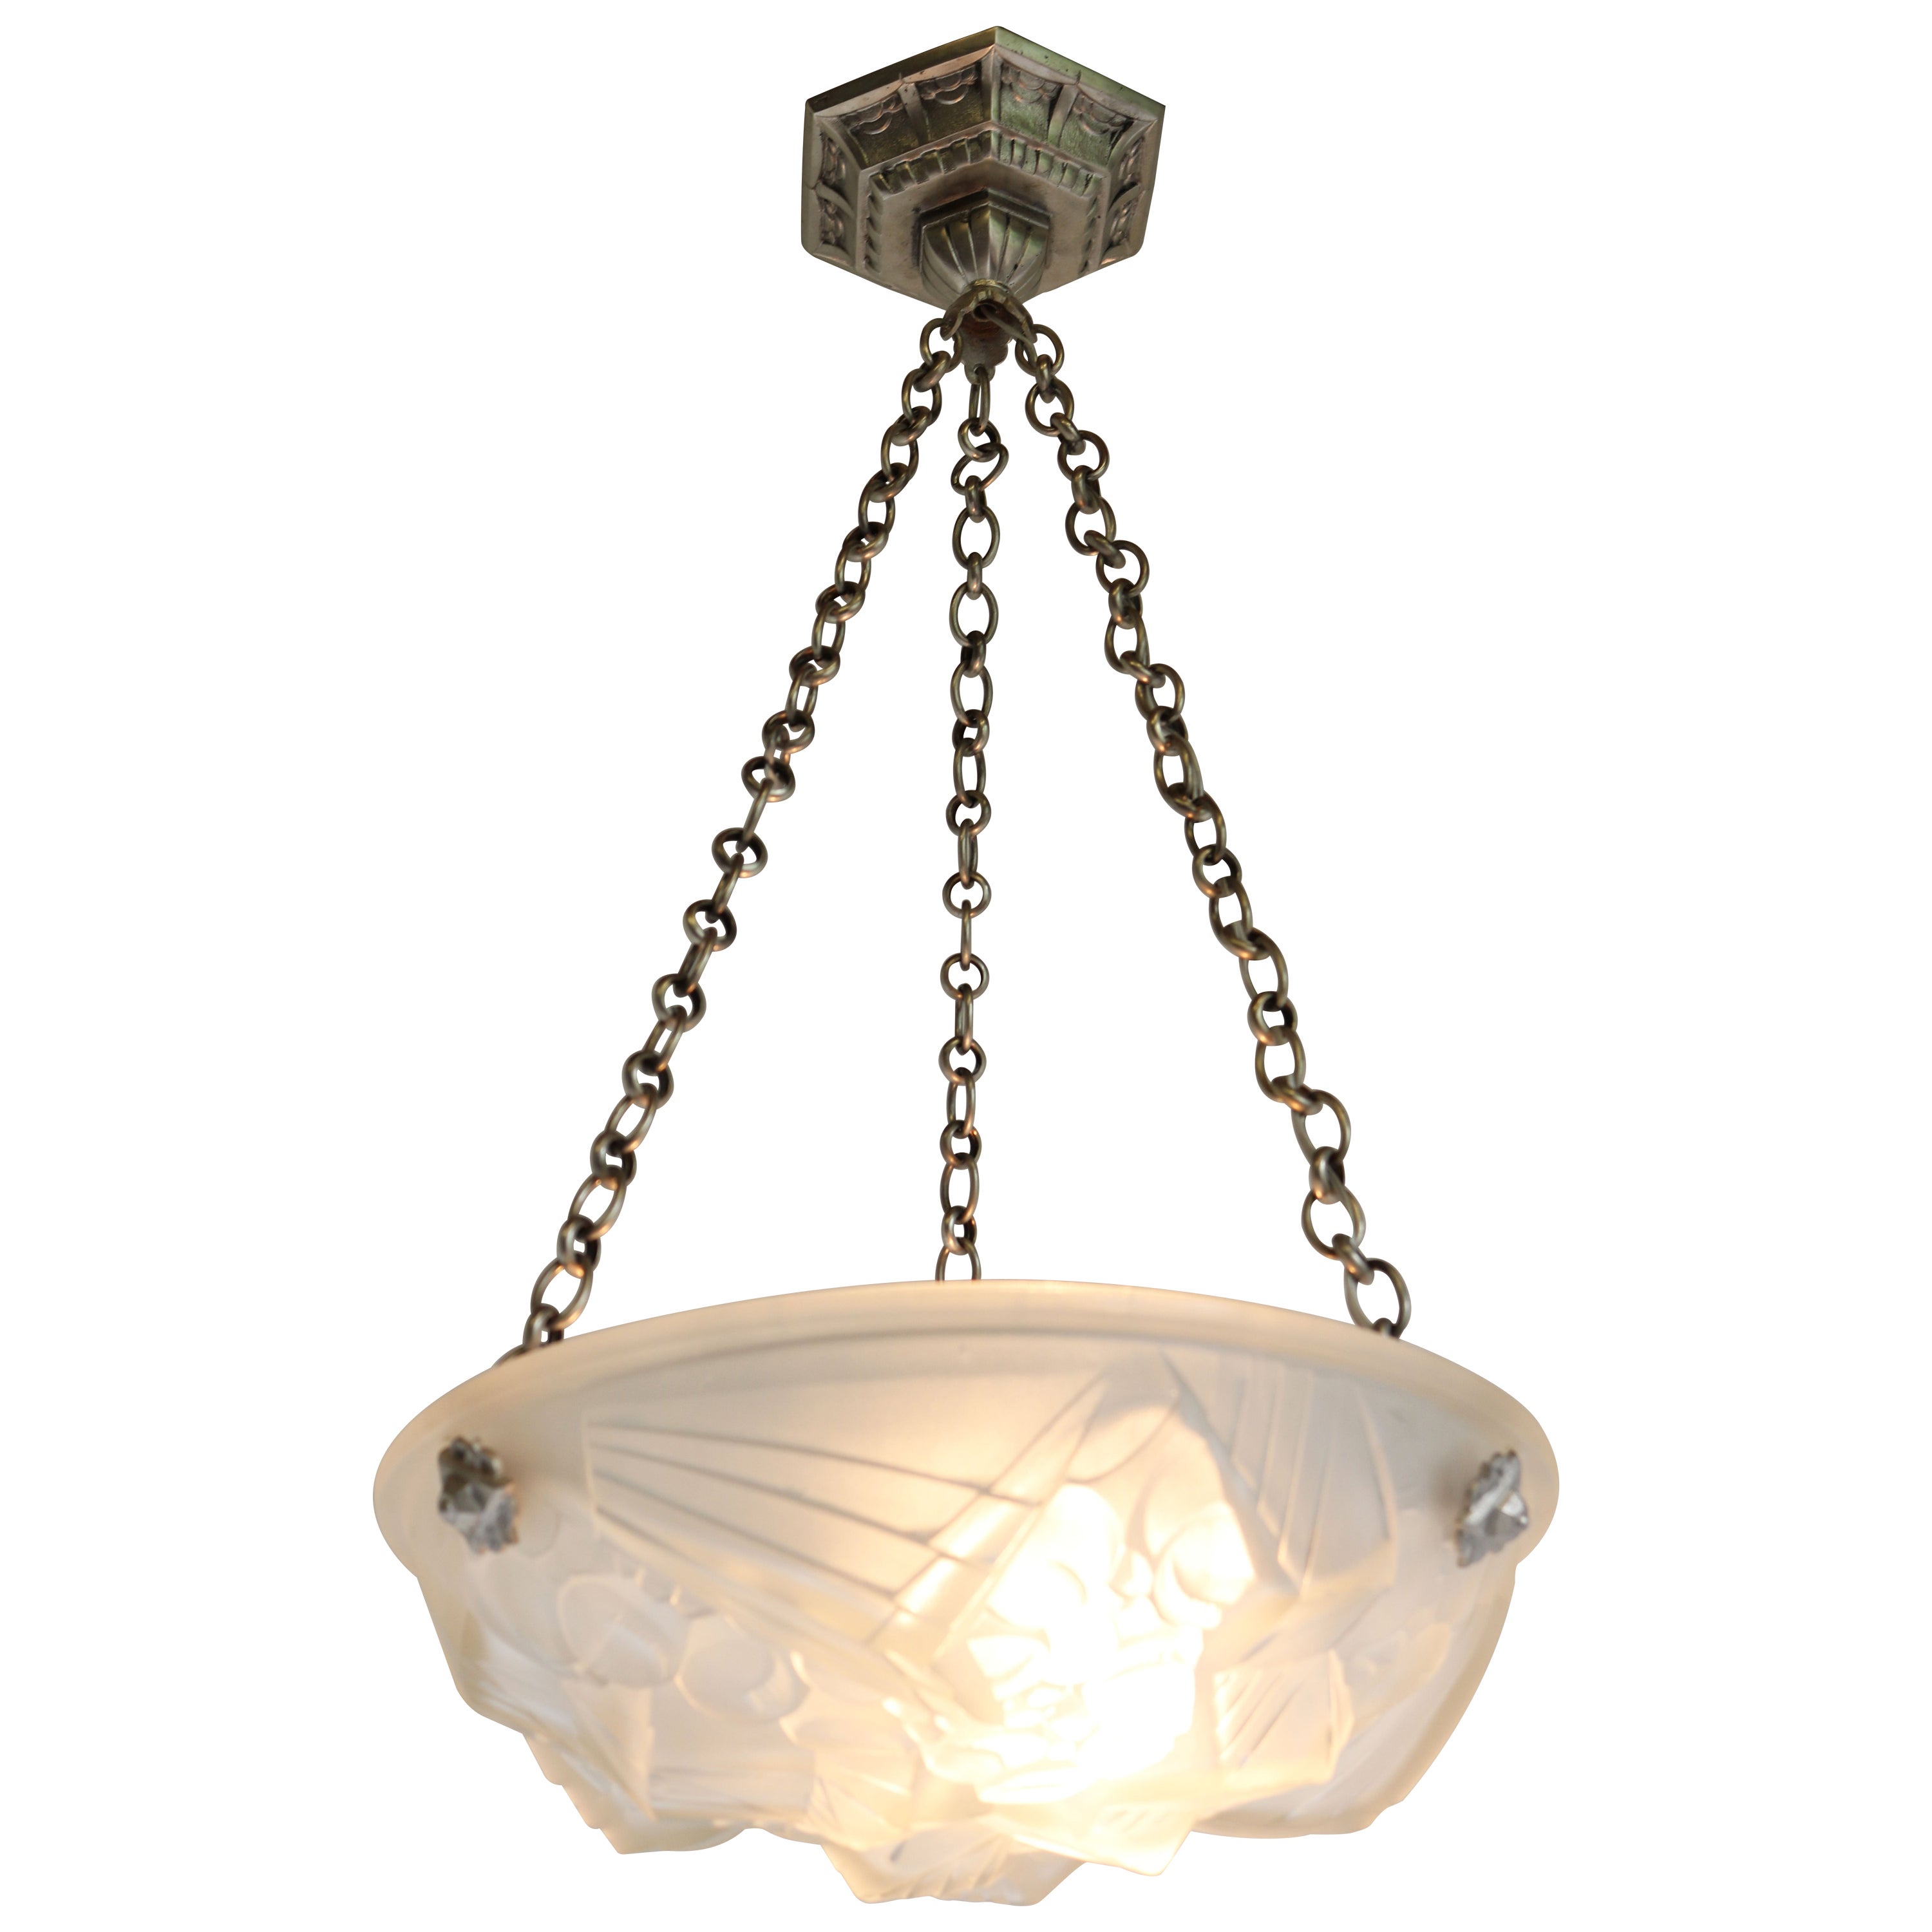 French Antique Art Deco Pendant Light Chandelier by Mouynet Design 1920 White For Sale